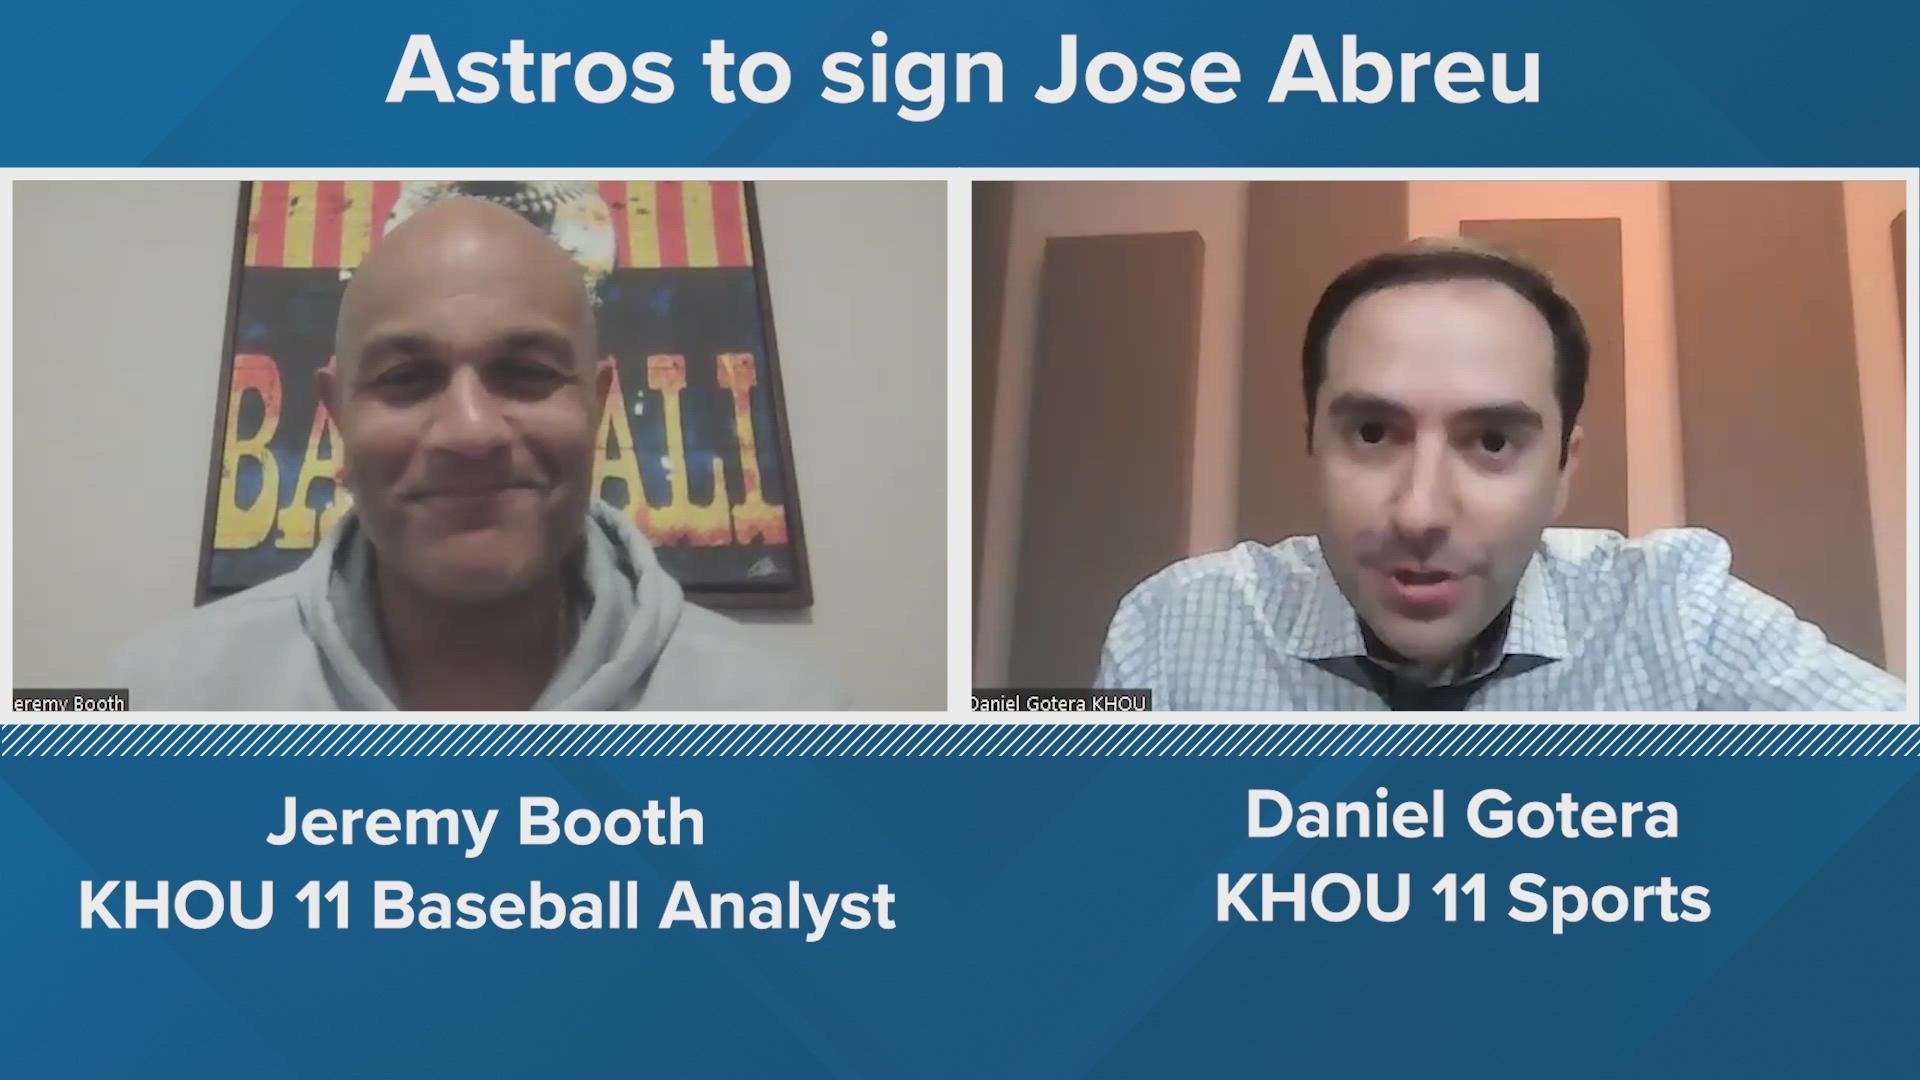 KHOU 11's Daniel Gotera and baseball analyst Jeremy Booth discuss the announcement that the Astros signed José Abreu in free agency.